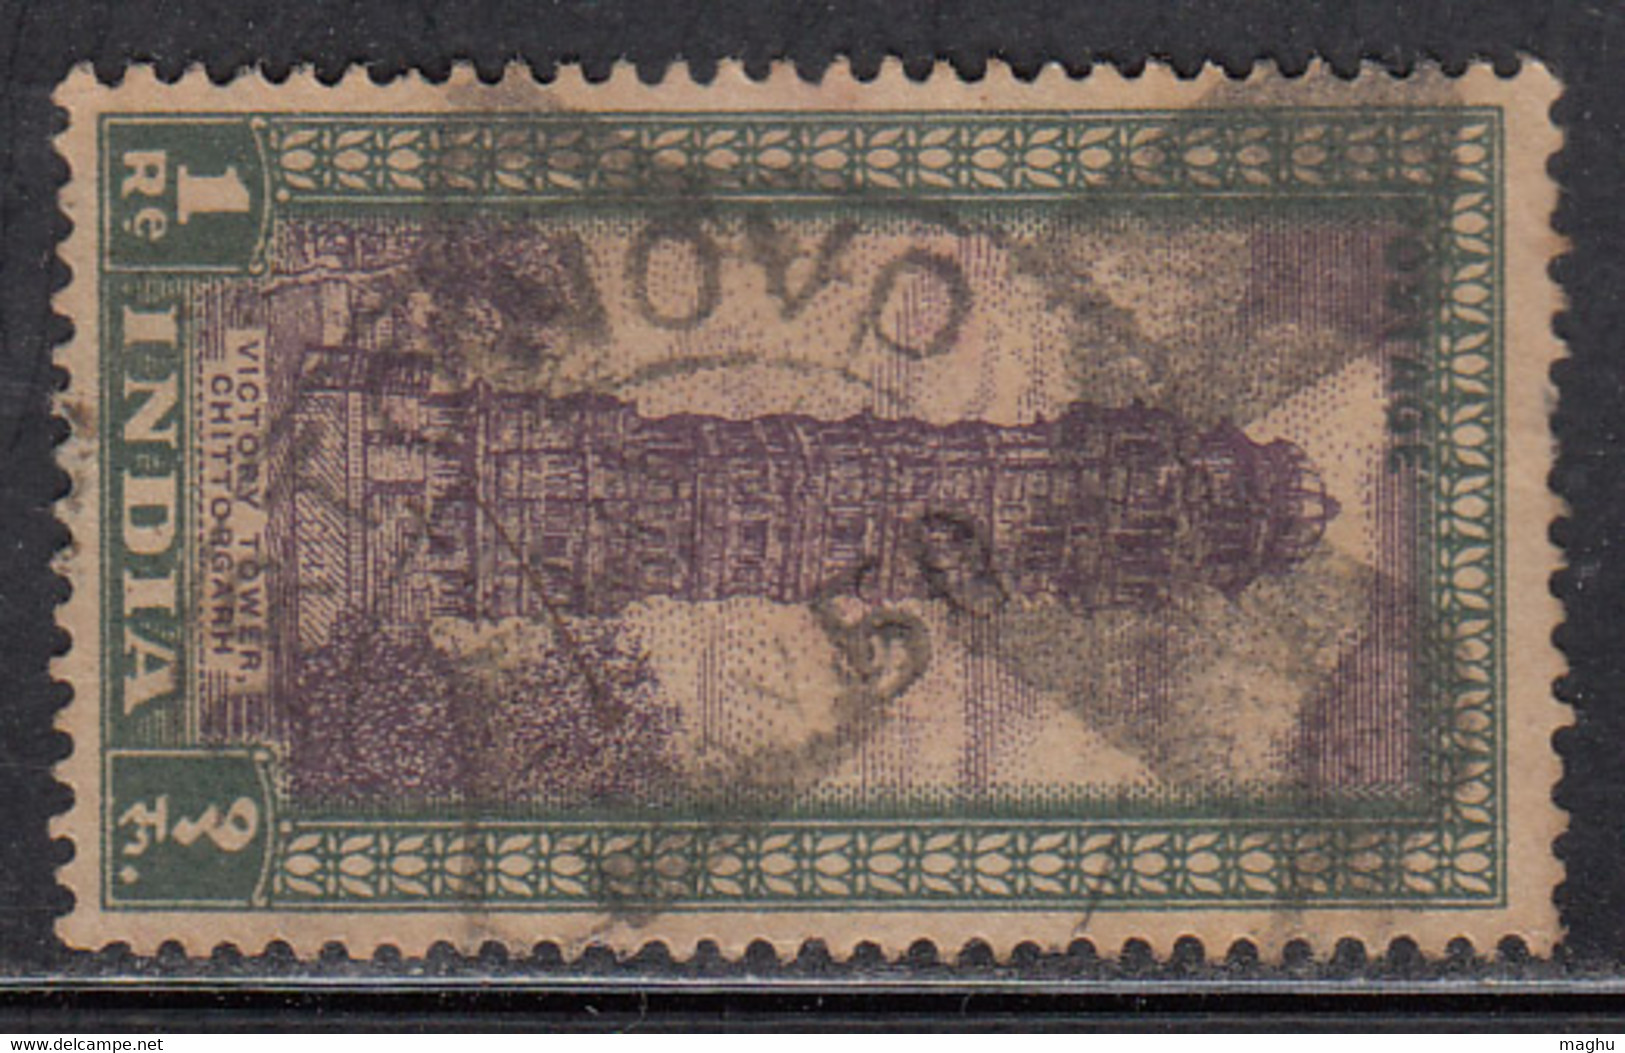 'PORTO NOVO' Pmk On 'Victory Tower' 1949 Archaelogical Series Used India, Portugal Colony - Used Stamps